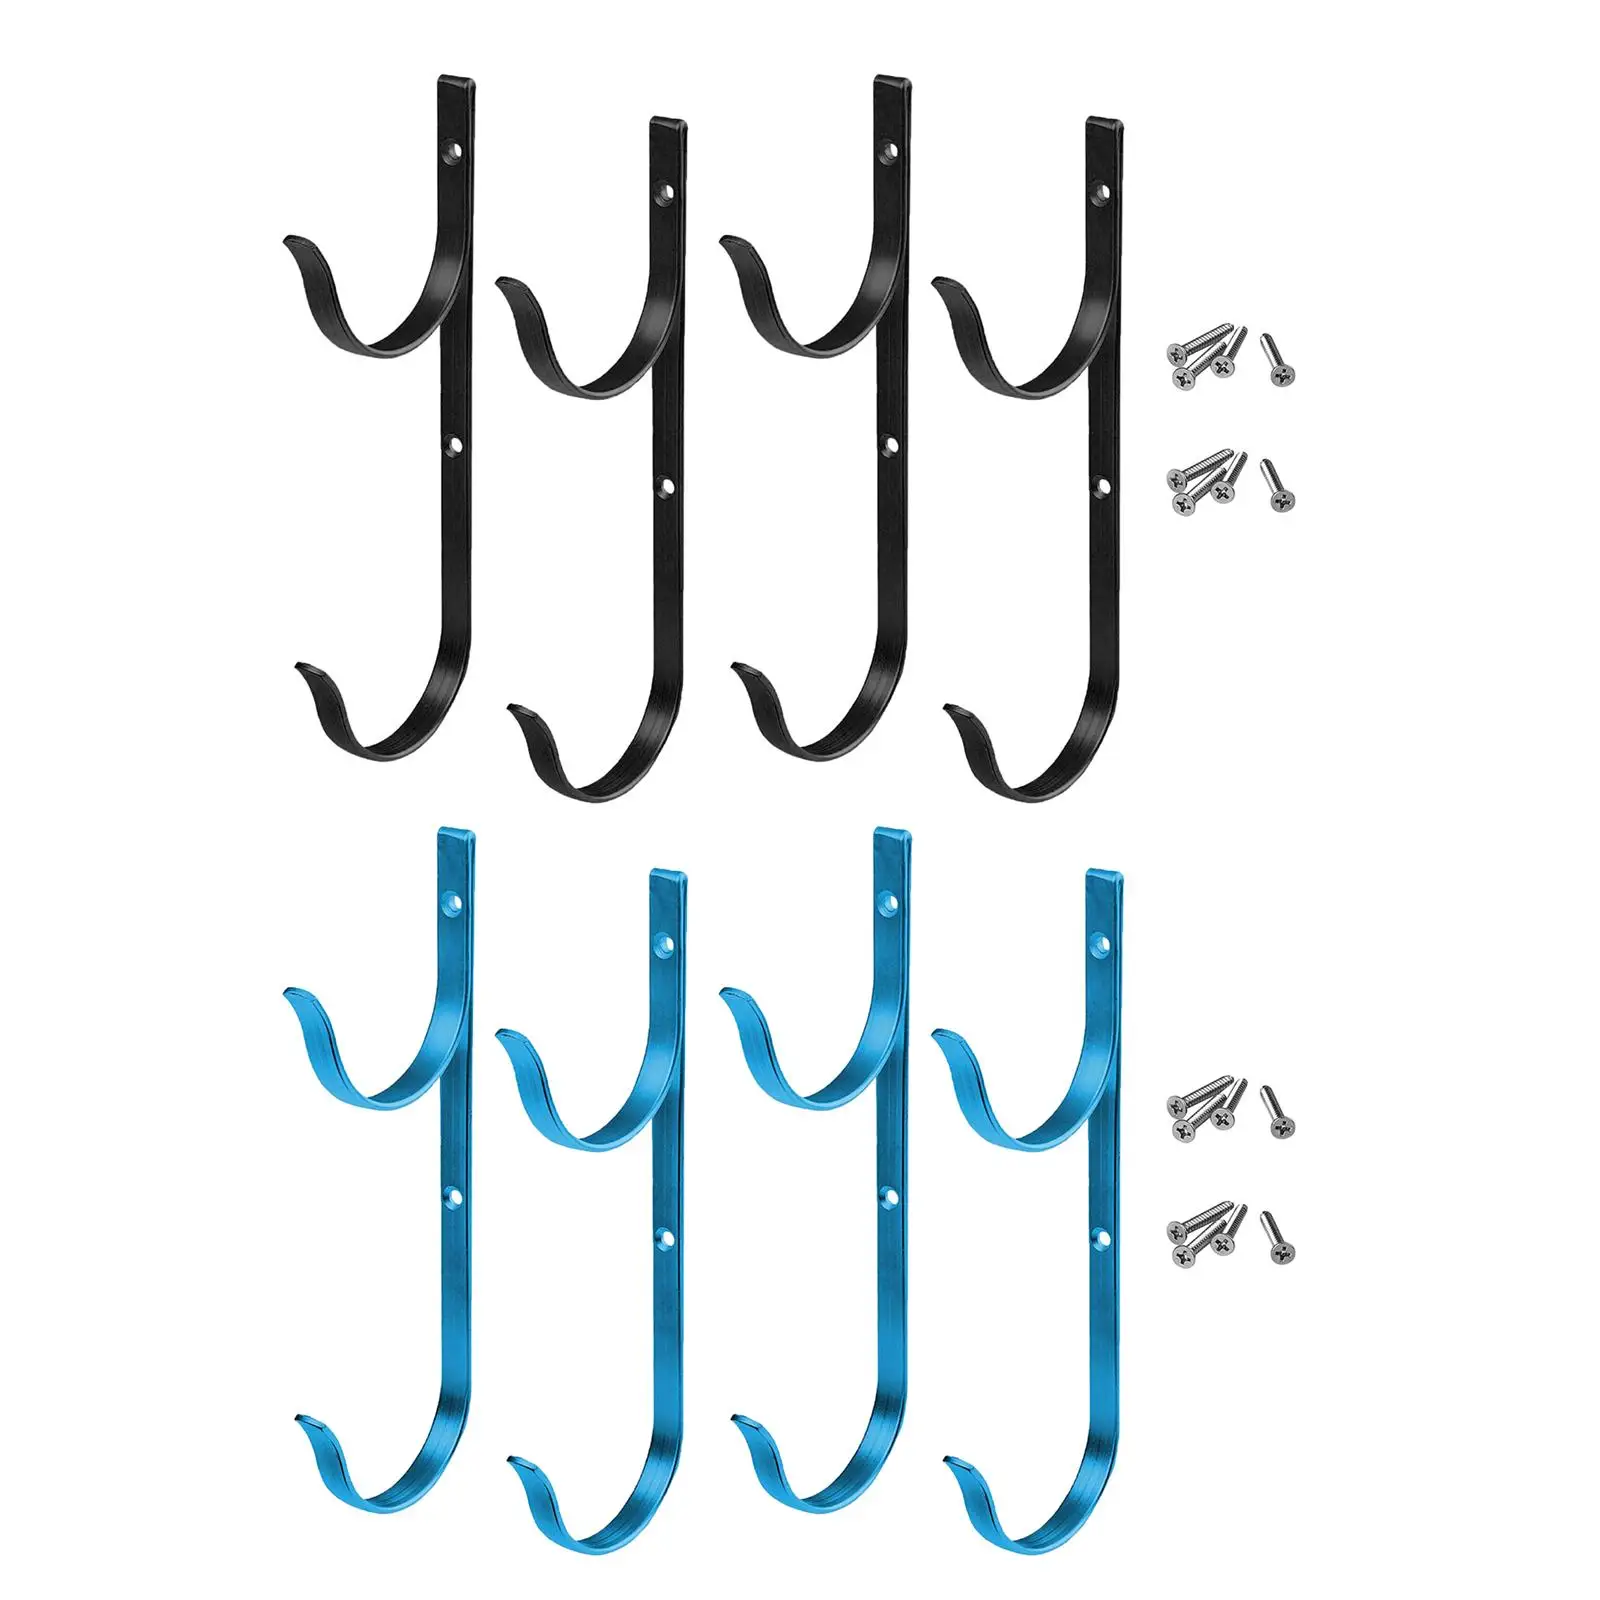 4 Pieces Premium Pool Pole Hangers with Screws Holder Brackets Pool Equipment Hooks for Leaf Skimmers Garden Tools Brushes